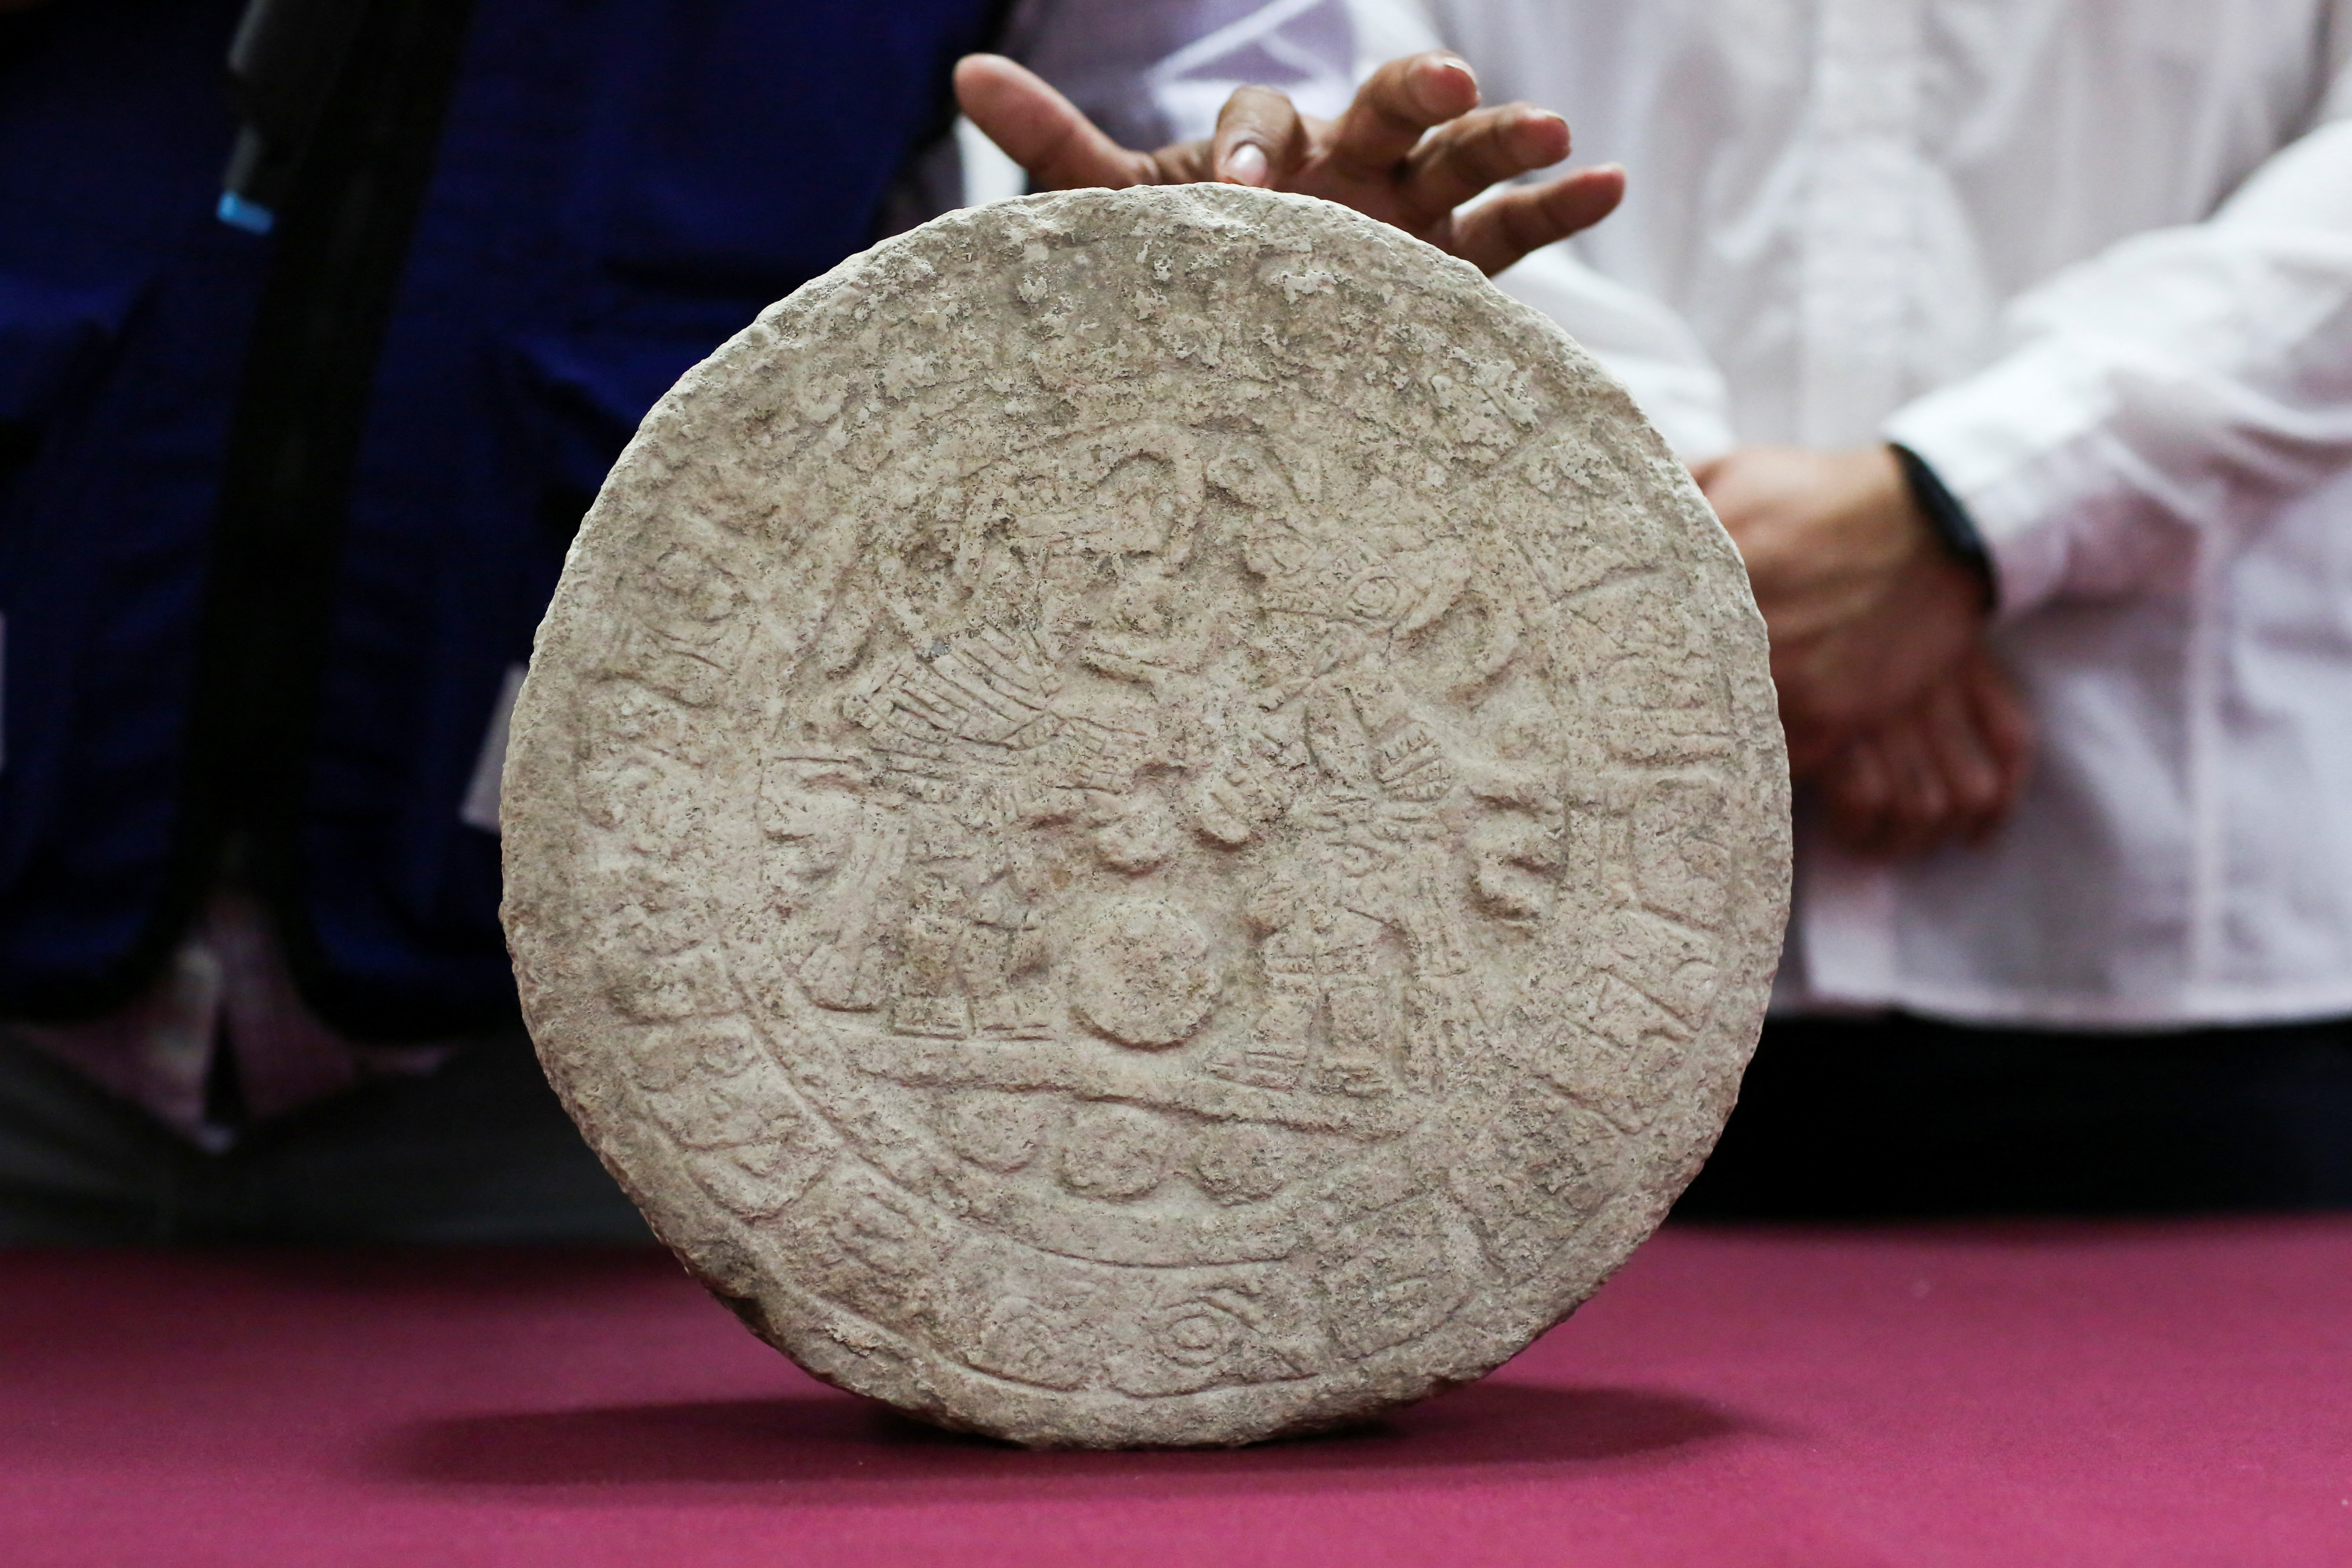 Mexican archaeologists discover Mayan ball game scoreboard